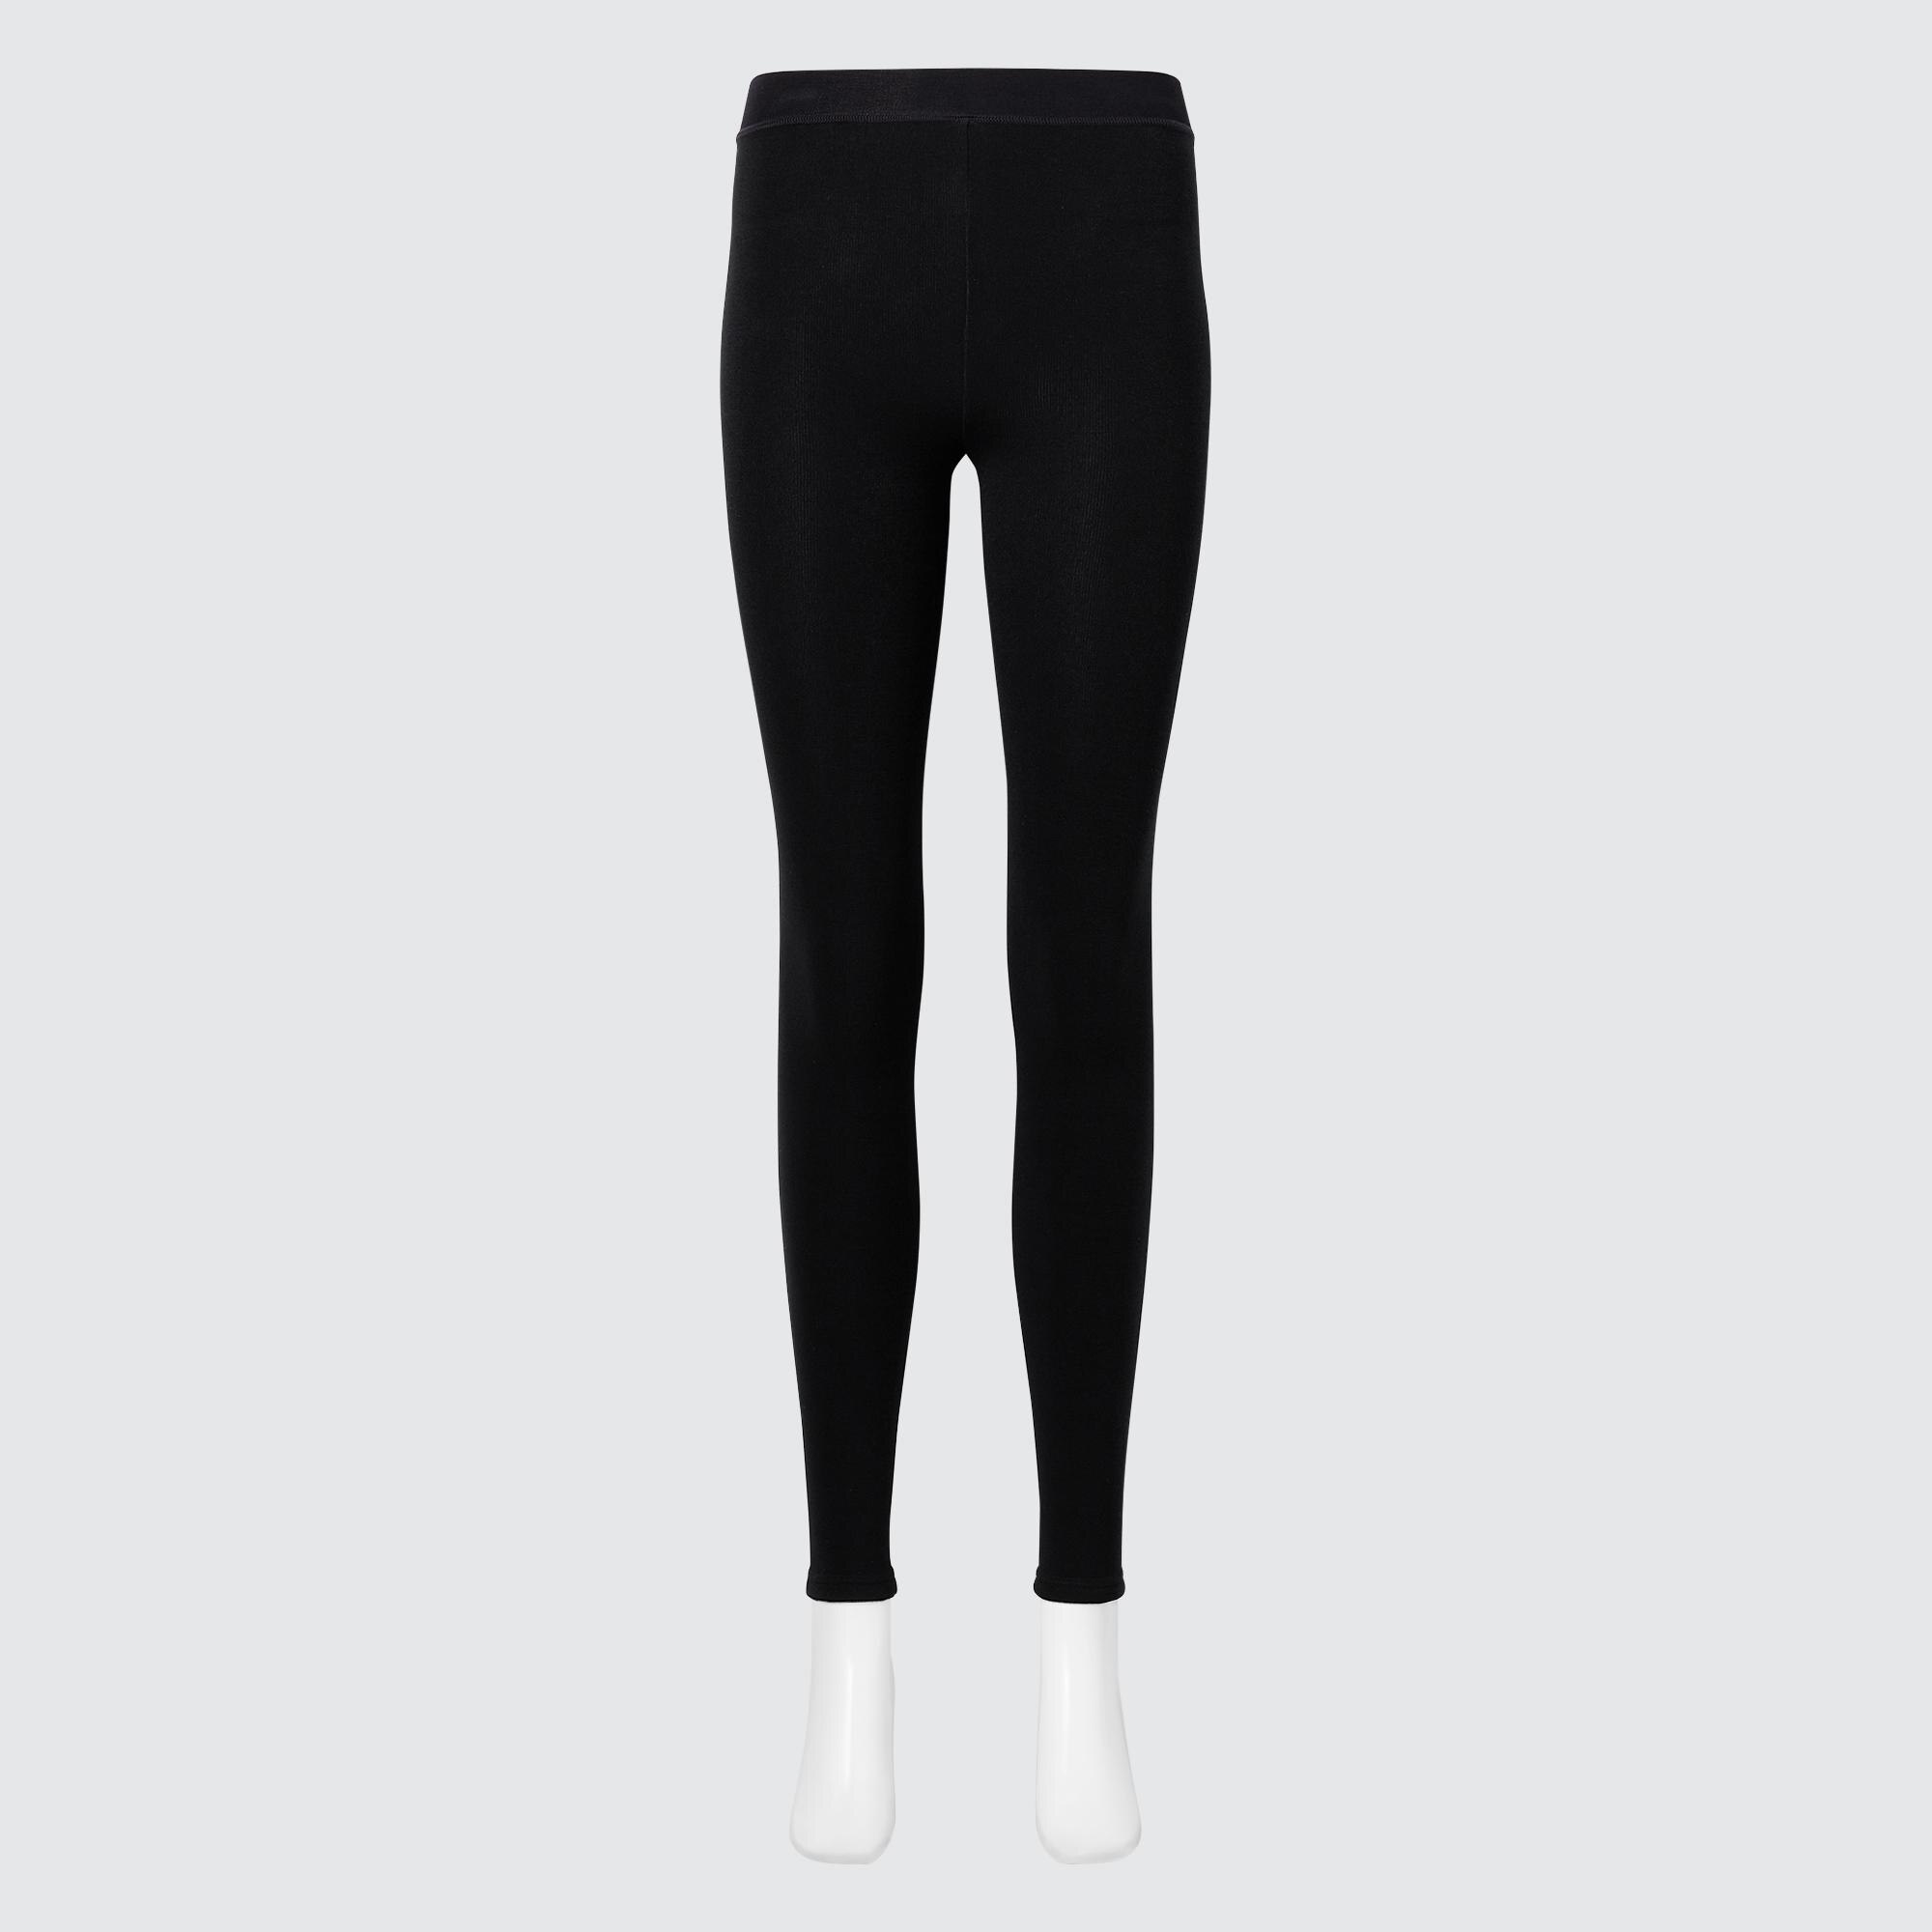 HEATTECH Extra Warm Pile Lined Thermal Leggings | UNIQLO